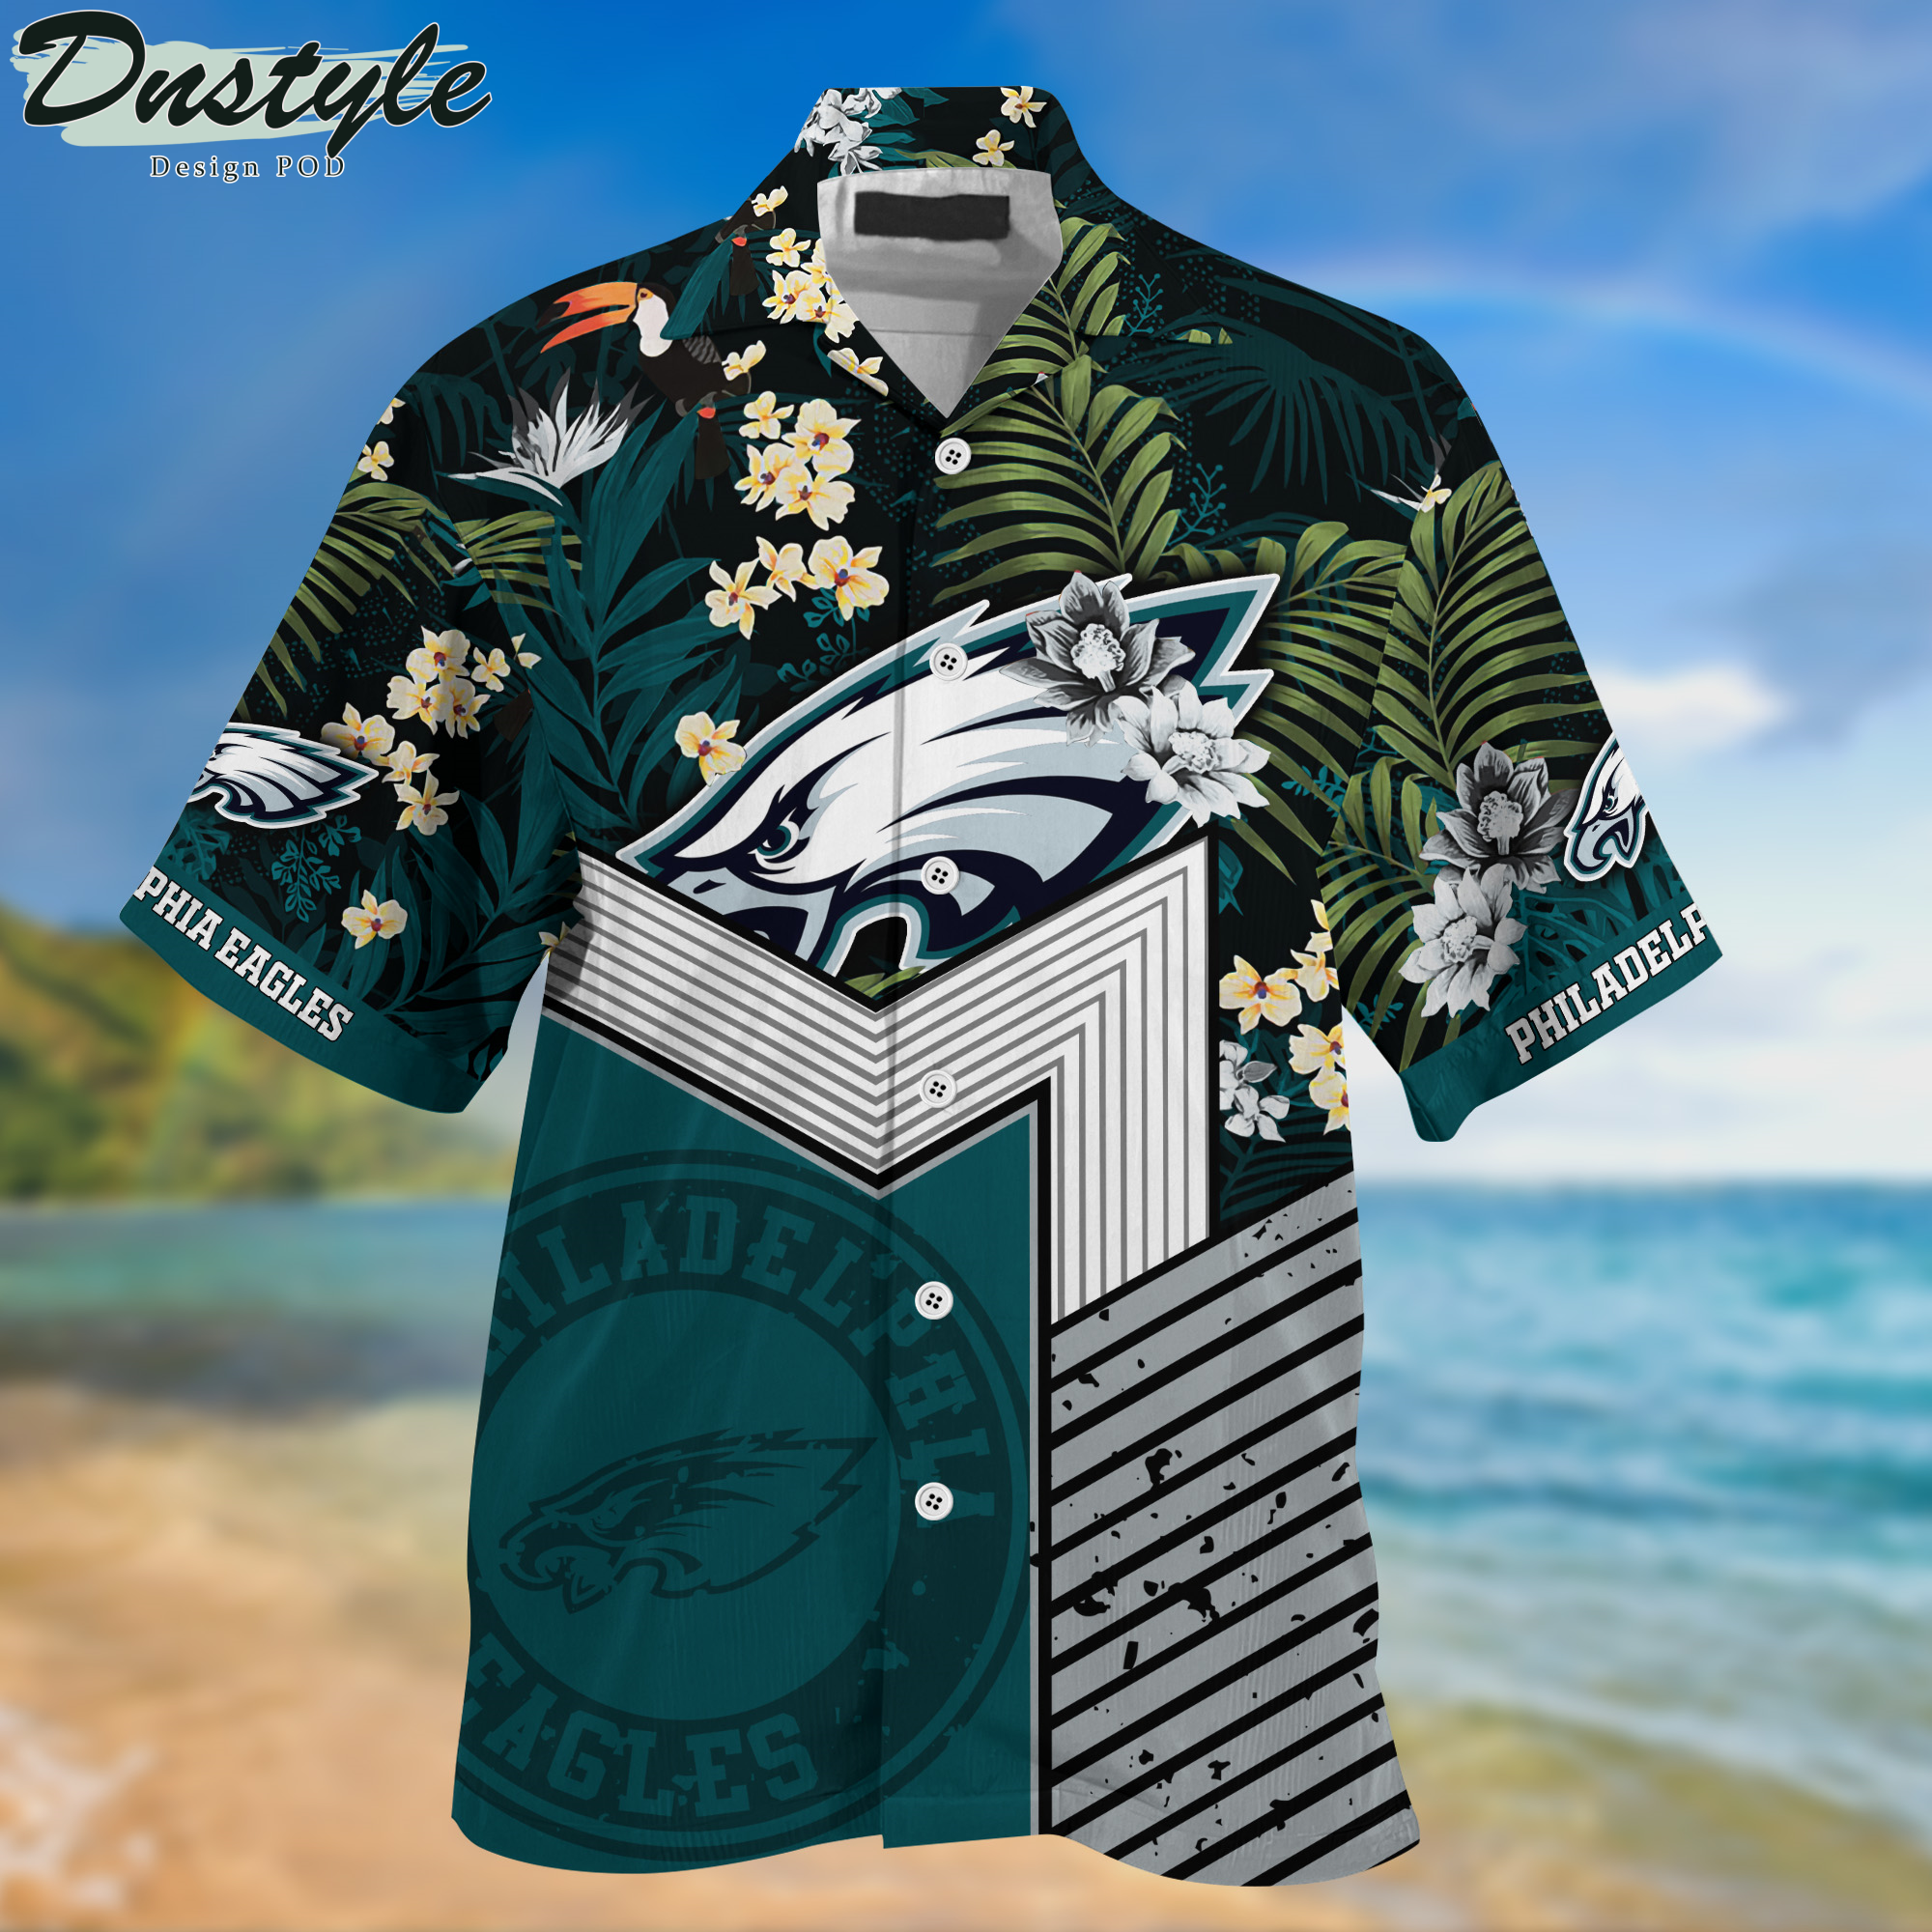 Philadelphia Eagles Hawaii Shirt And Shorts New Collection